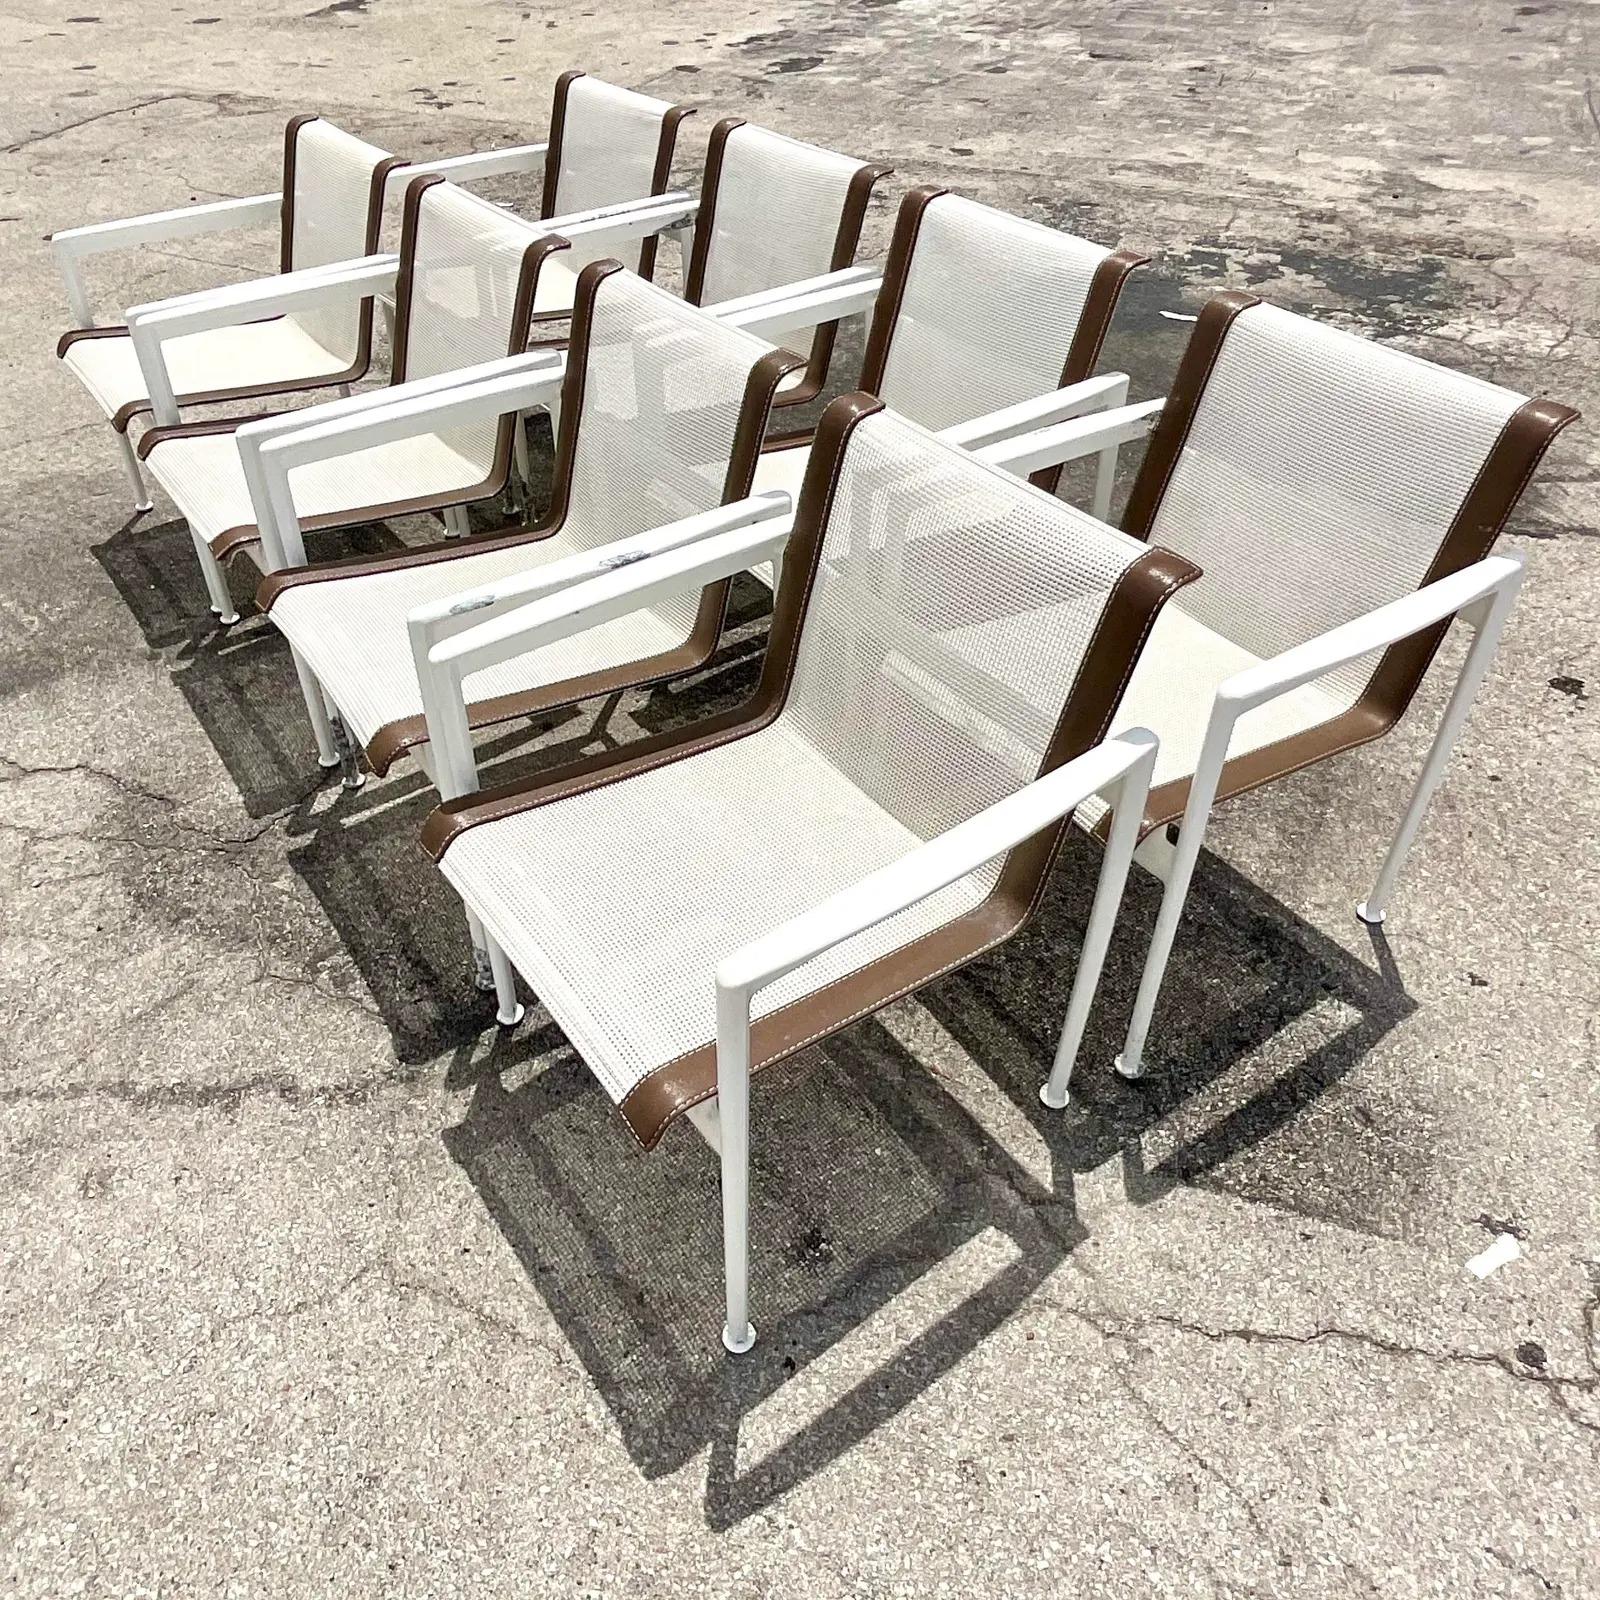 North American Vintage Midcentury Richard Schultz 1966 Series Dining Chairs - Set of 8